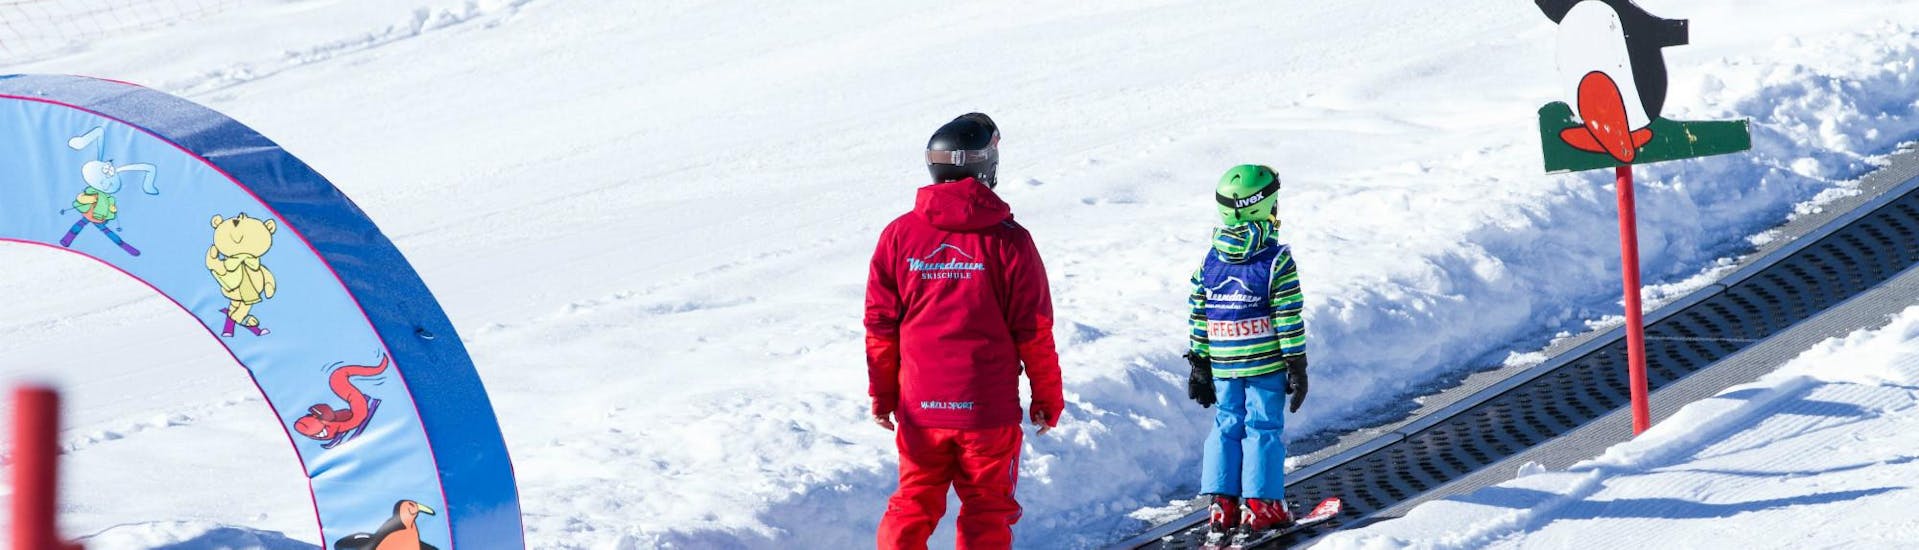 Kids Ski Lessons (3-7 y.) for Beginners - Half Day.